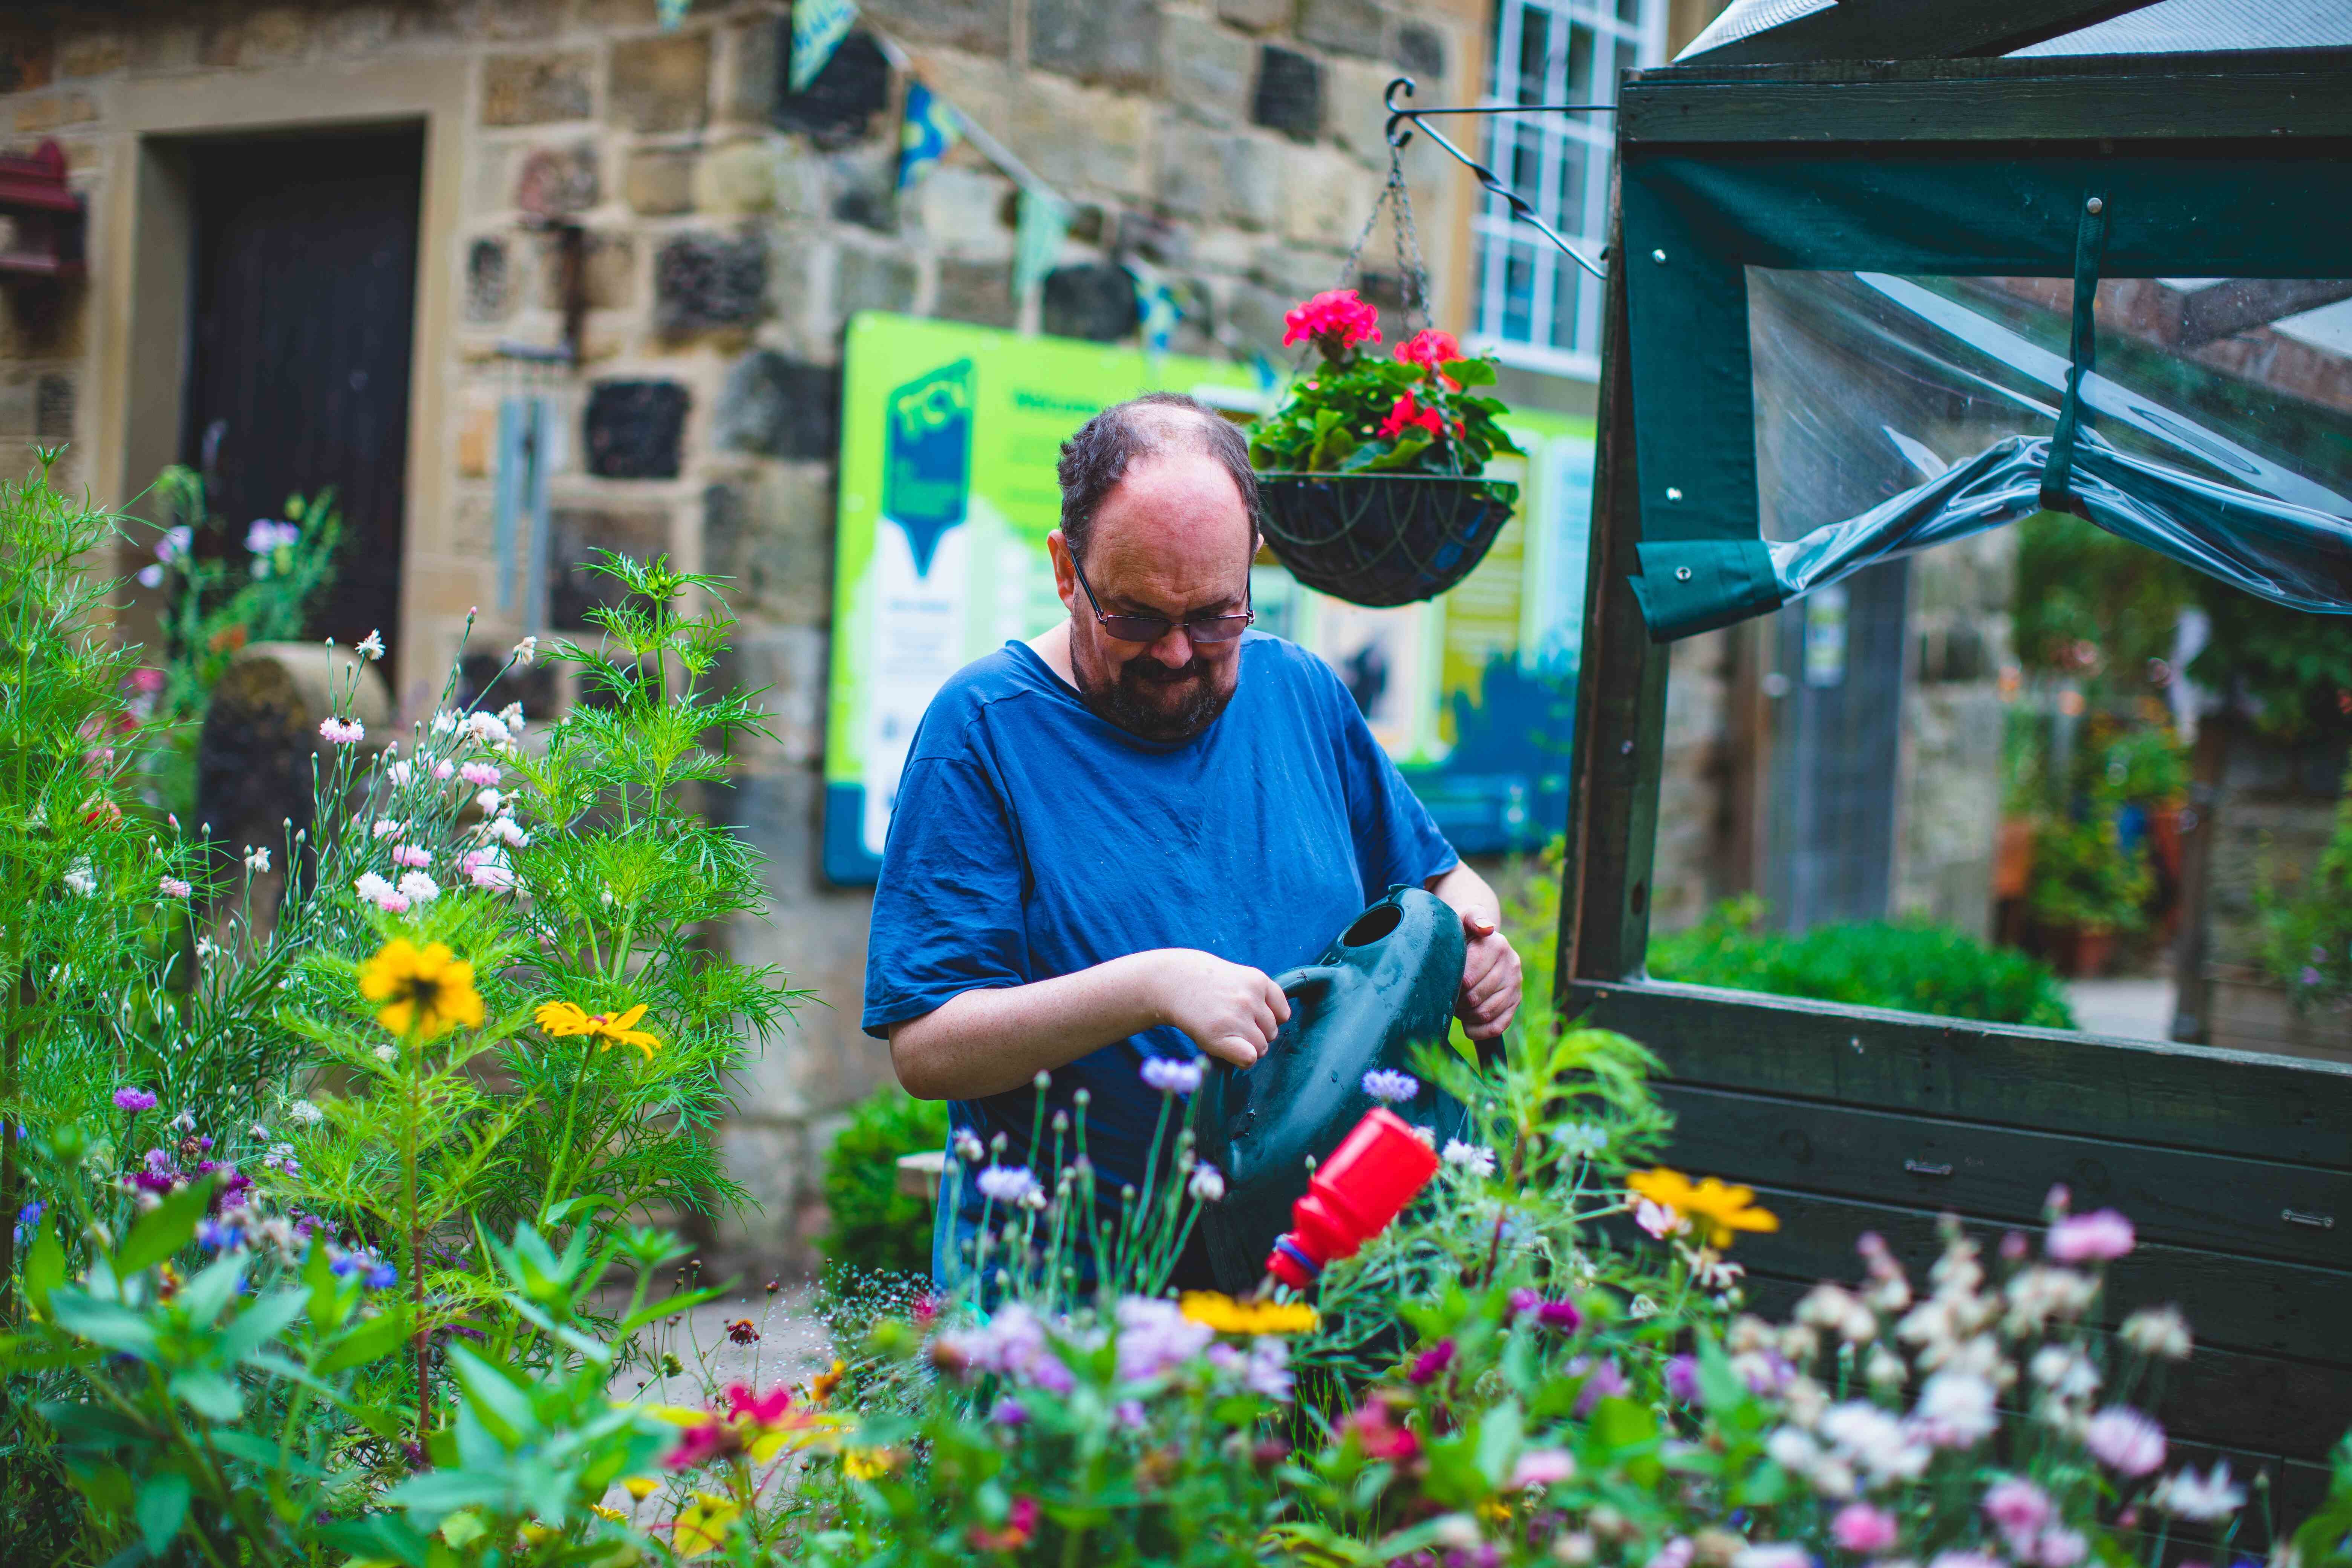 A man in a blue t-shirt watering garden plants with a green watering can